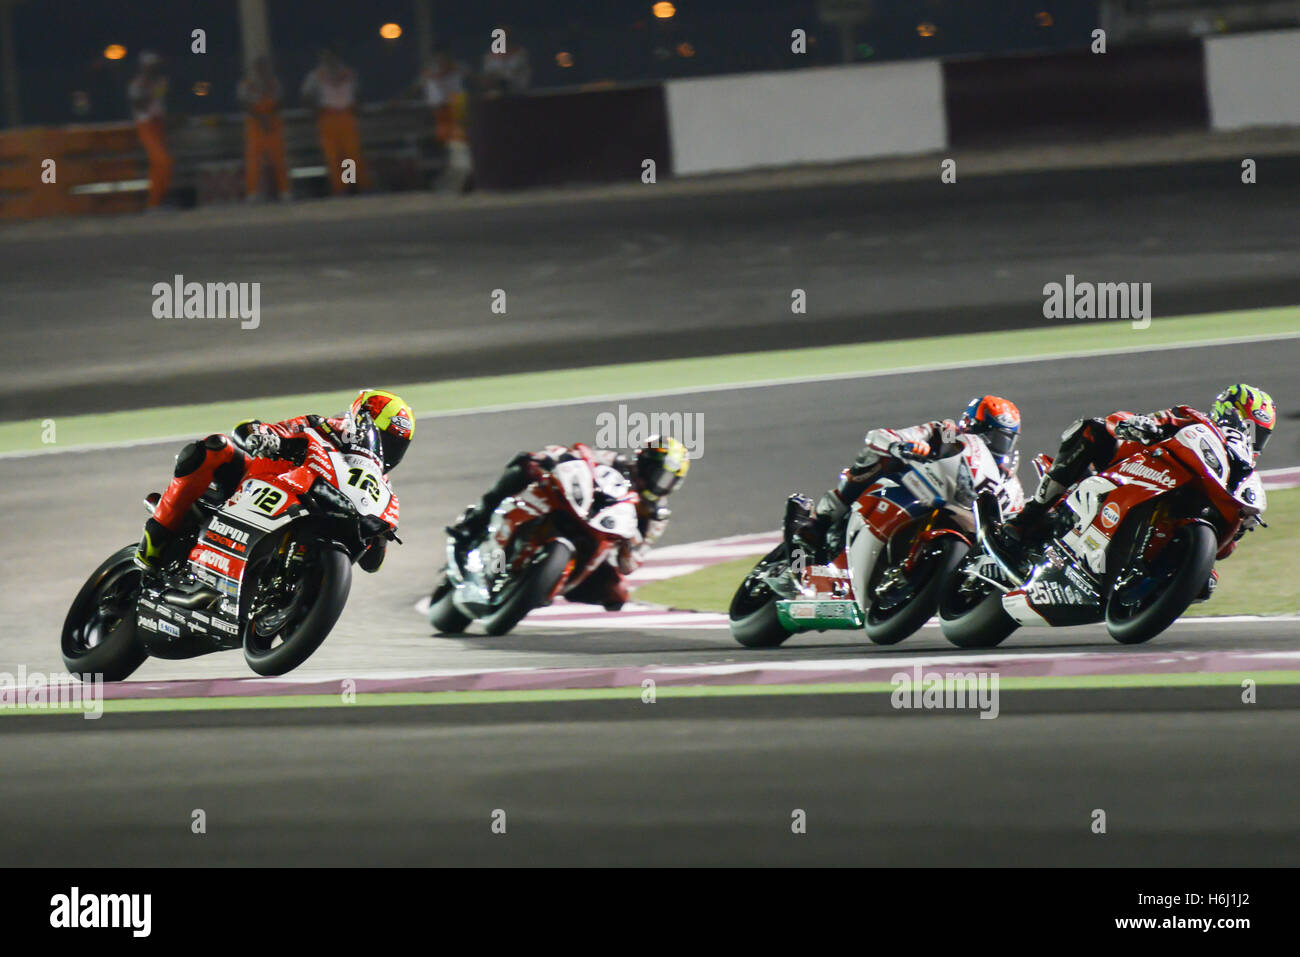 Losail Circuit Doha, Qatar.  28th October 2016.  Xavi Fores who rides for Ducati during the final round of the 2016 FIM World Superbike Championship (c) Gina Layva/Alamy Stock Photo